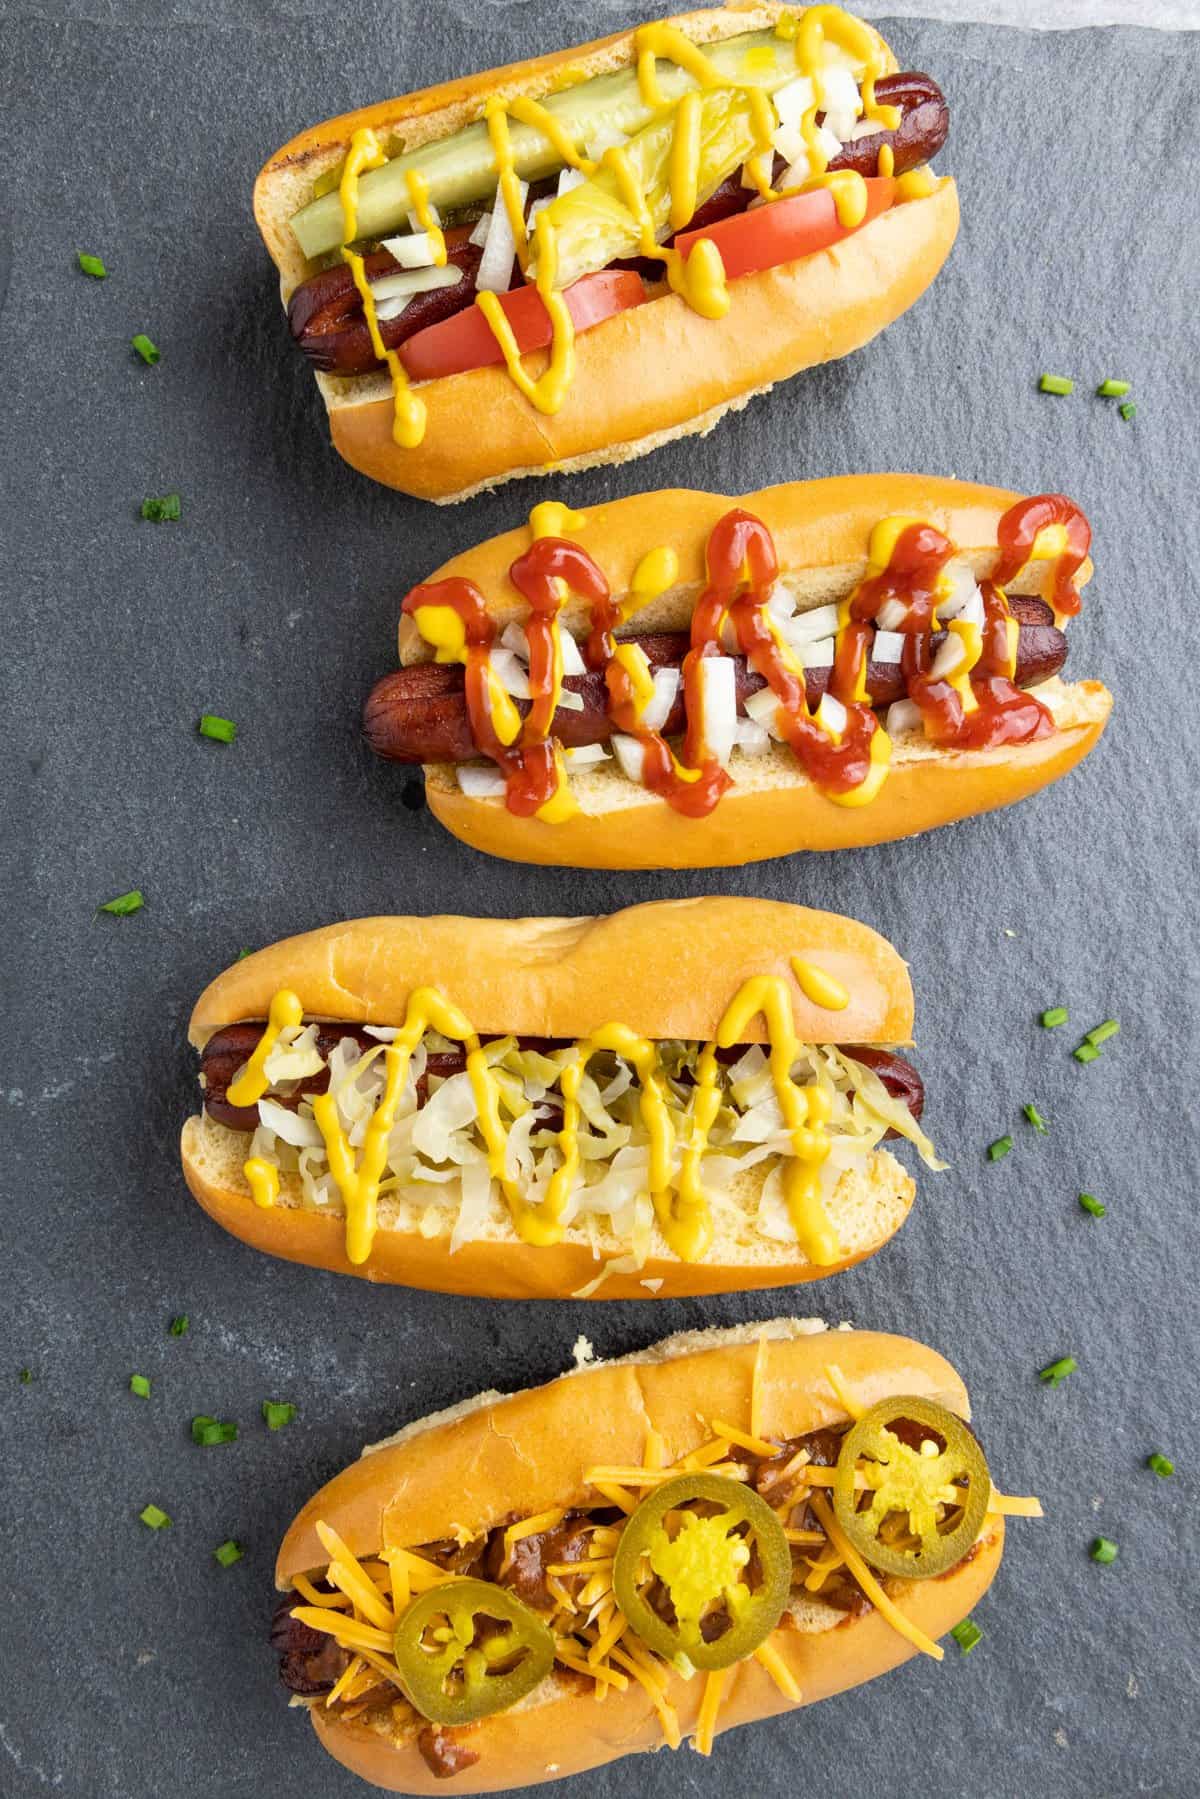 Four smoked hot dogs on grey slate with different toppings